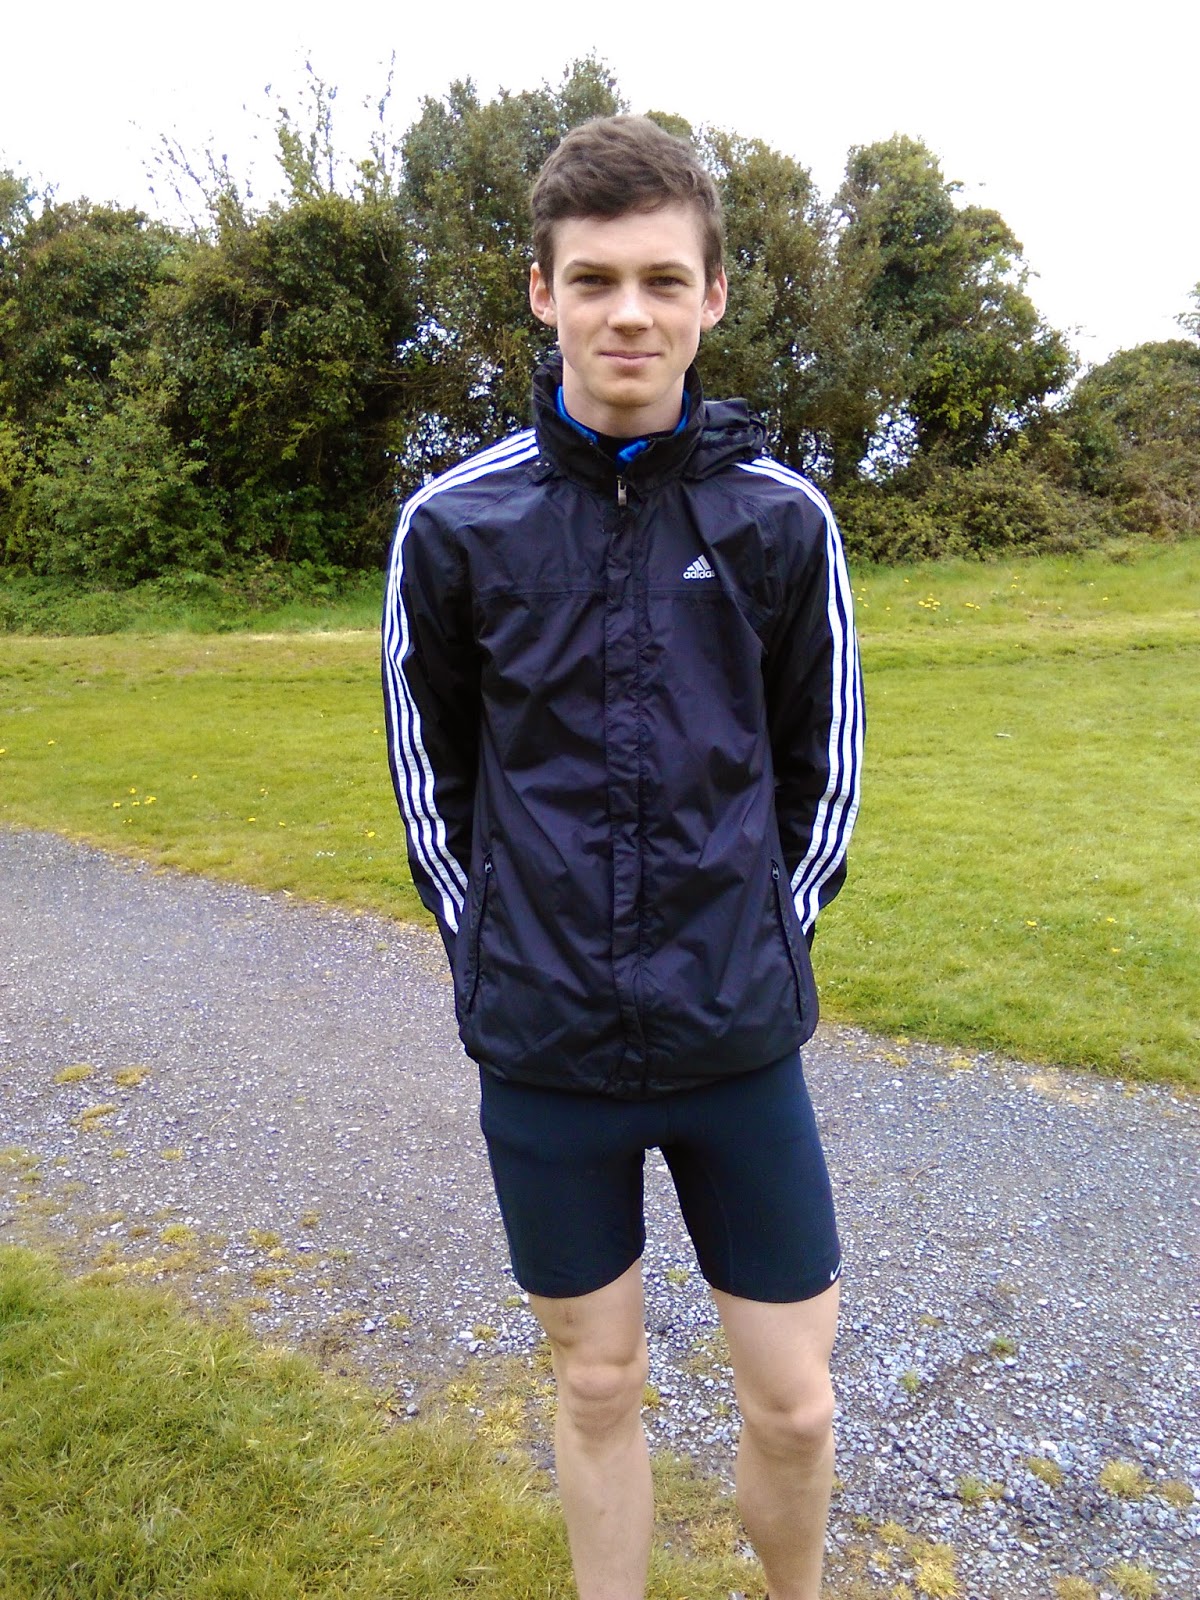 Ratoath Athletic Club: Conor Duncan under 2 mins for 800m